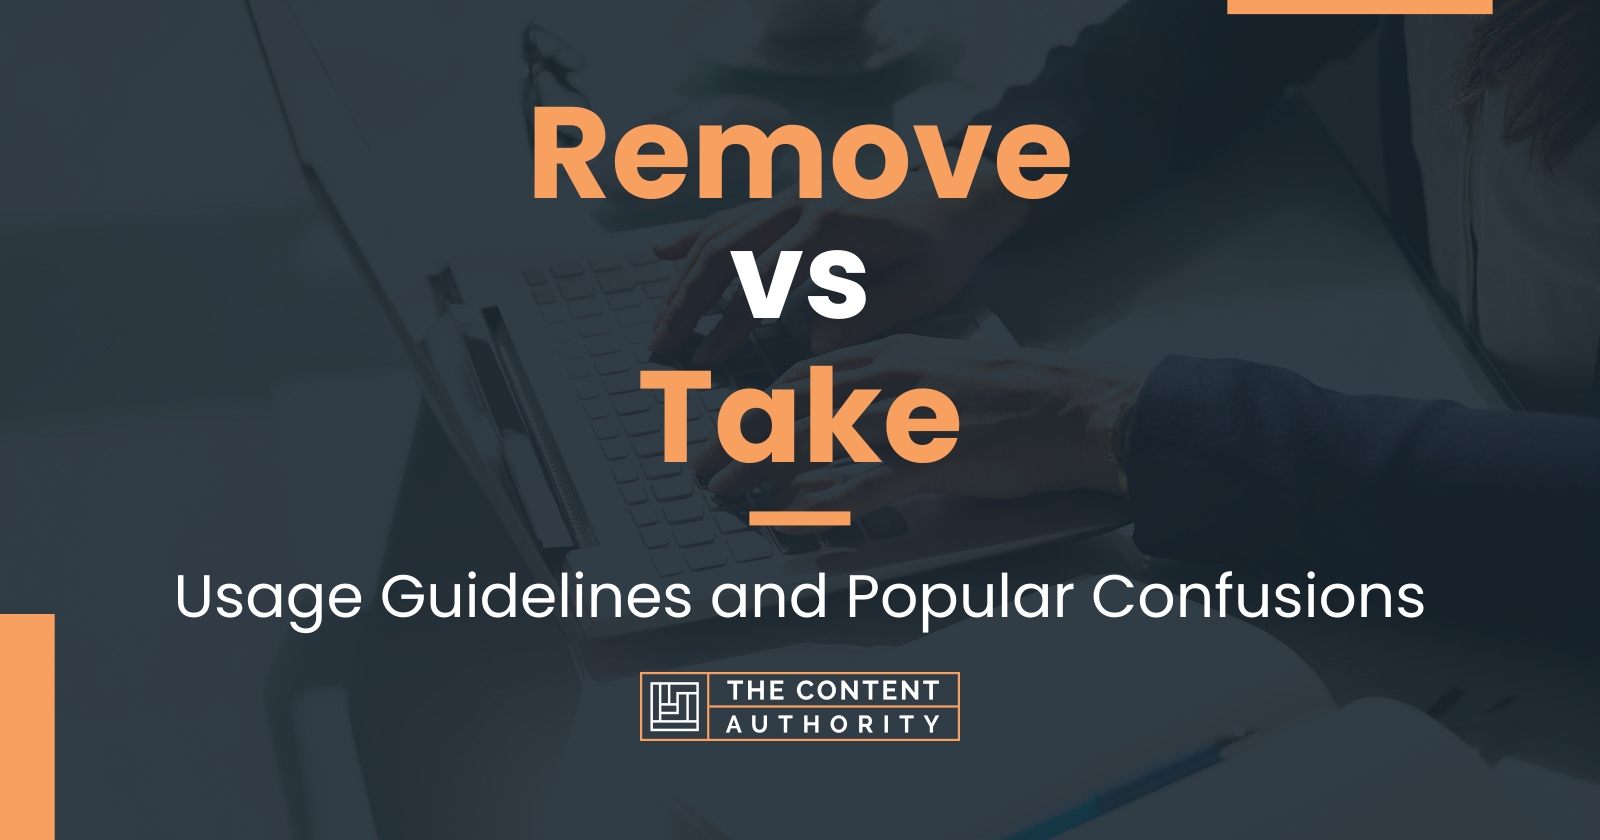 Remove vs Take: Usage Guidelines and Popular Confusions